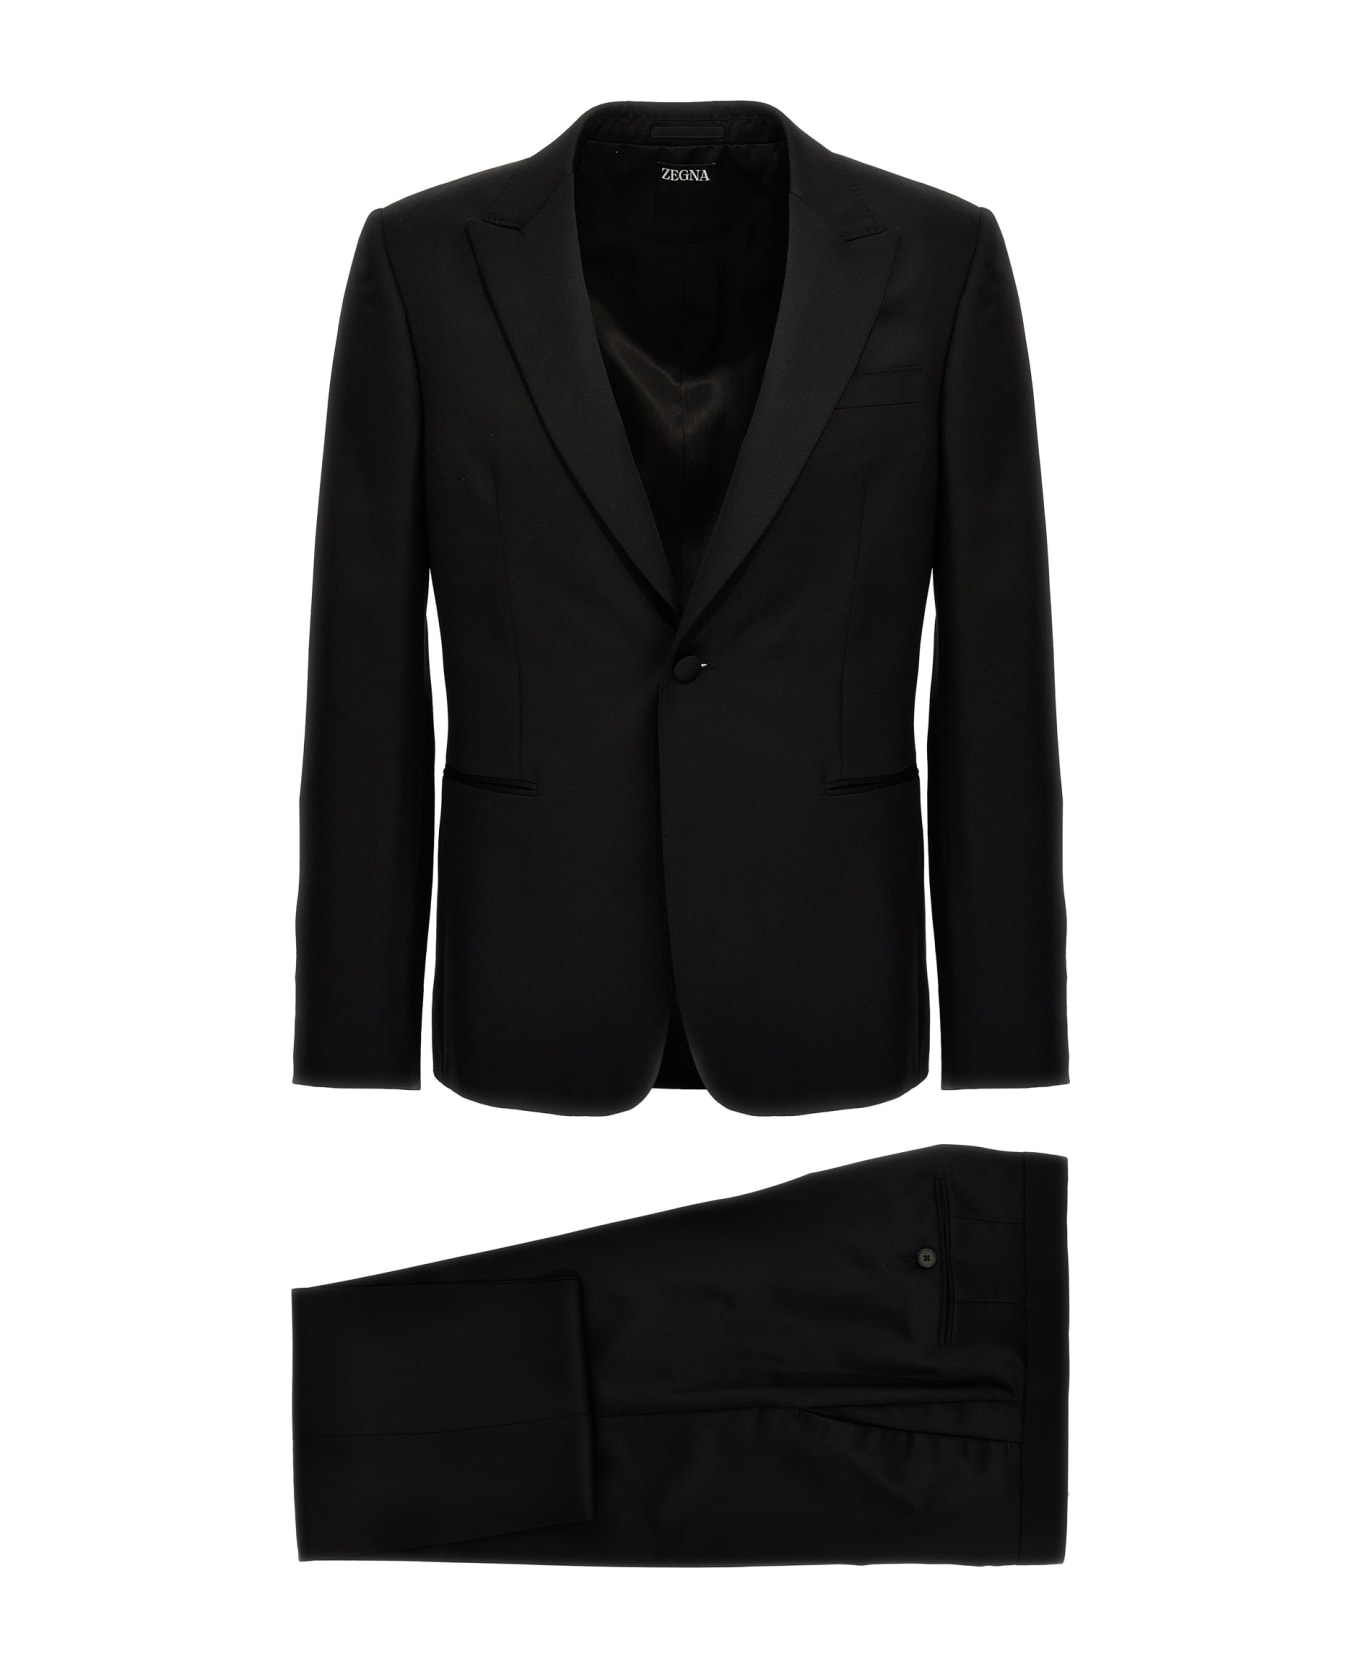 Zegna Wool And Mohair Suit - Black   スーツ